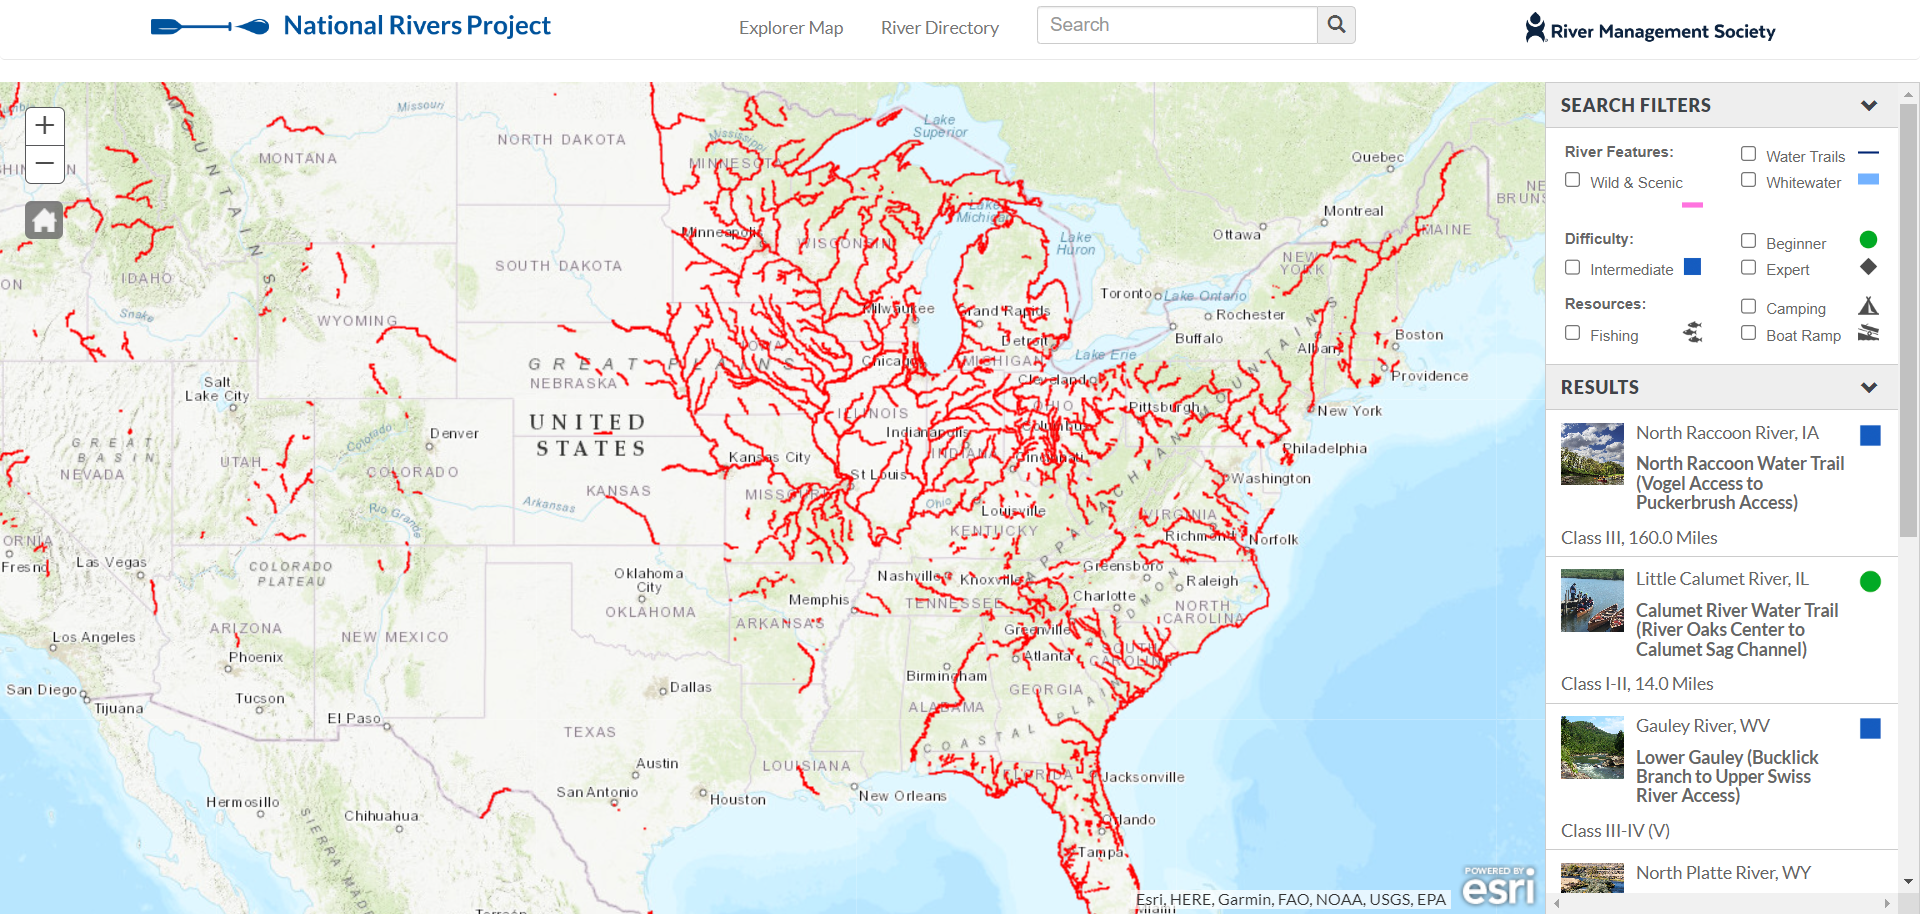 National Rivers Project Explorer Map